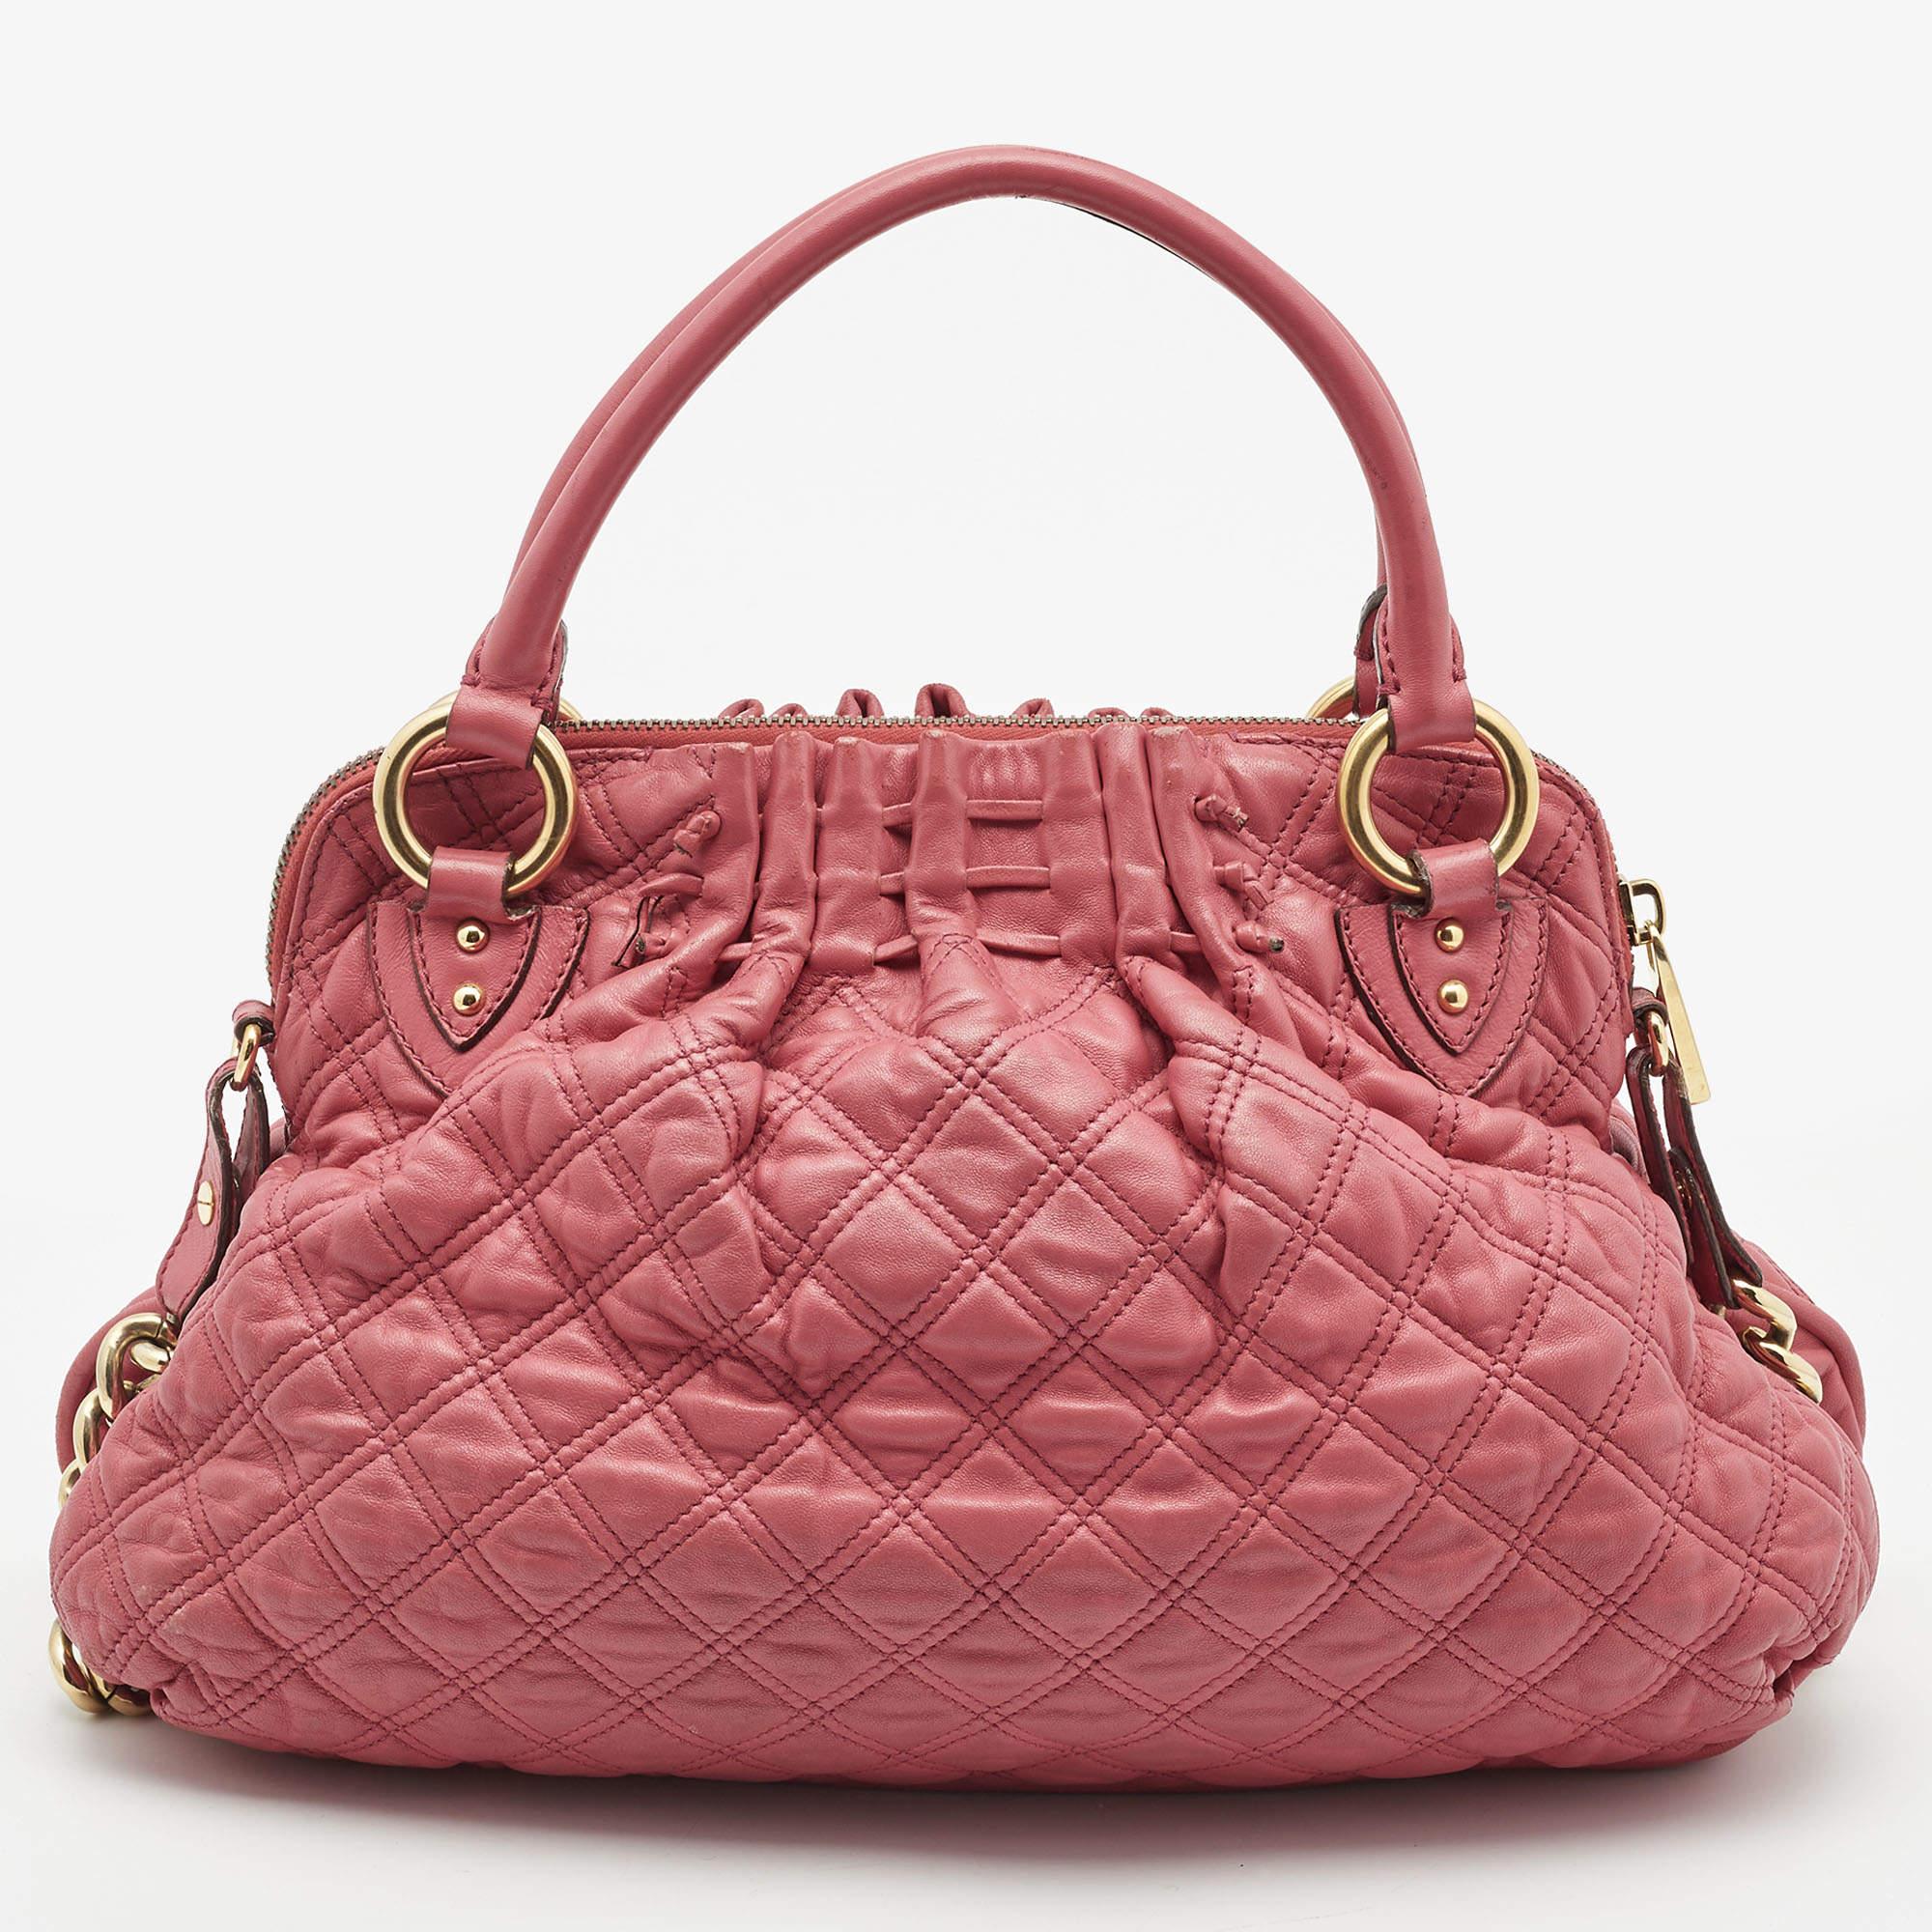 Handbags are more than just instruments to carry one's essentials. They tell a woman's sense of style, and the better the bag, the more confidence she gets when she holds it. This designer bag is meticulously made from luxe materials and has a